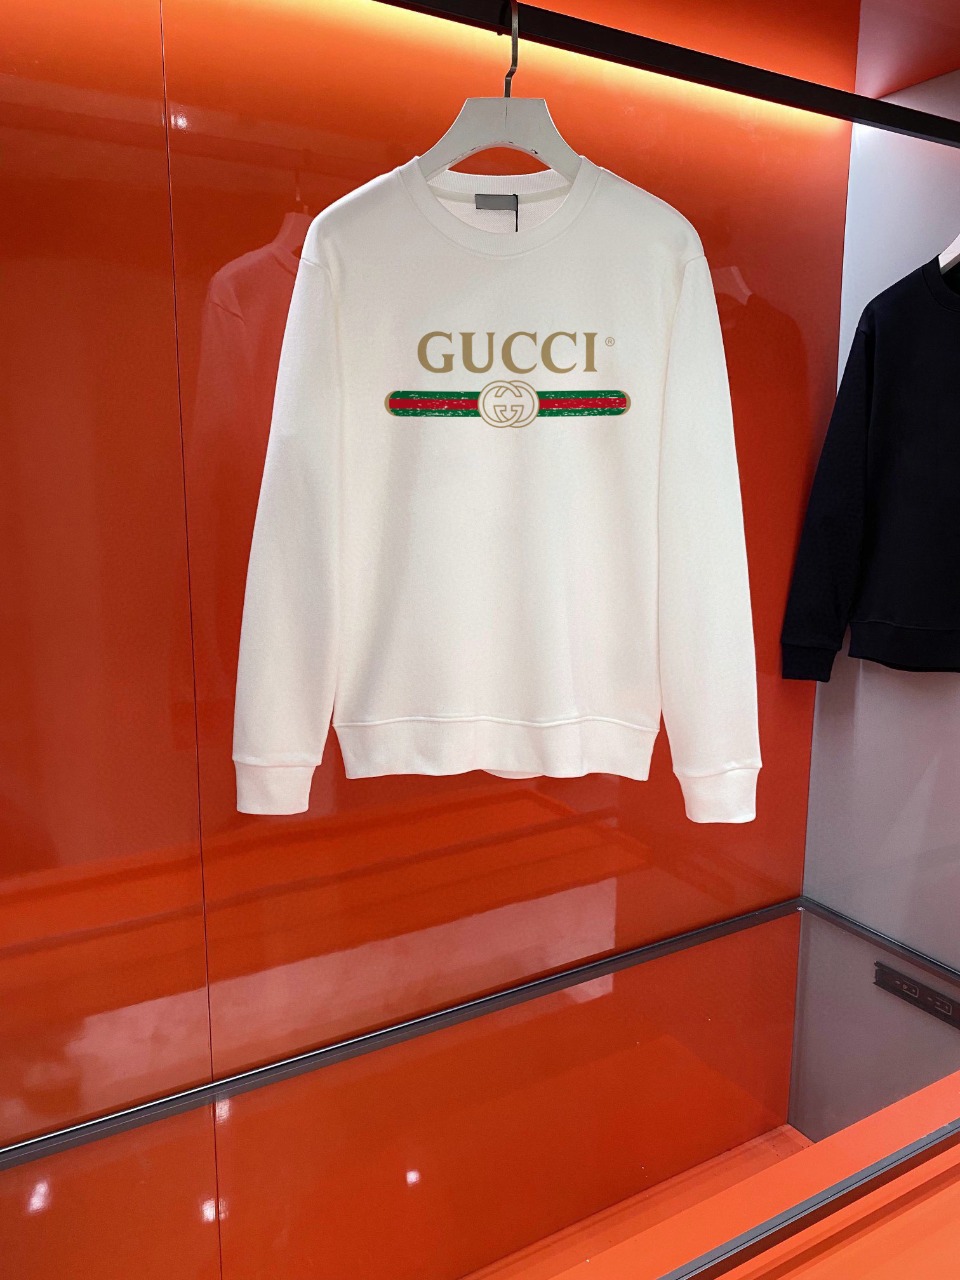 Gucci Clothing Sweatshirts Black White Printing Unisex Cotton Fall/Winter Collection Casual